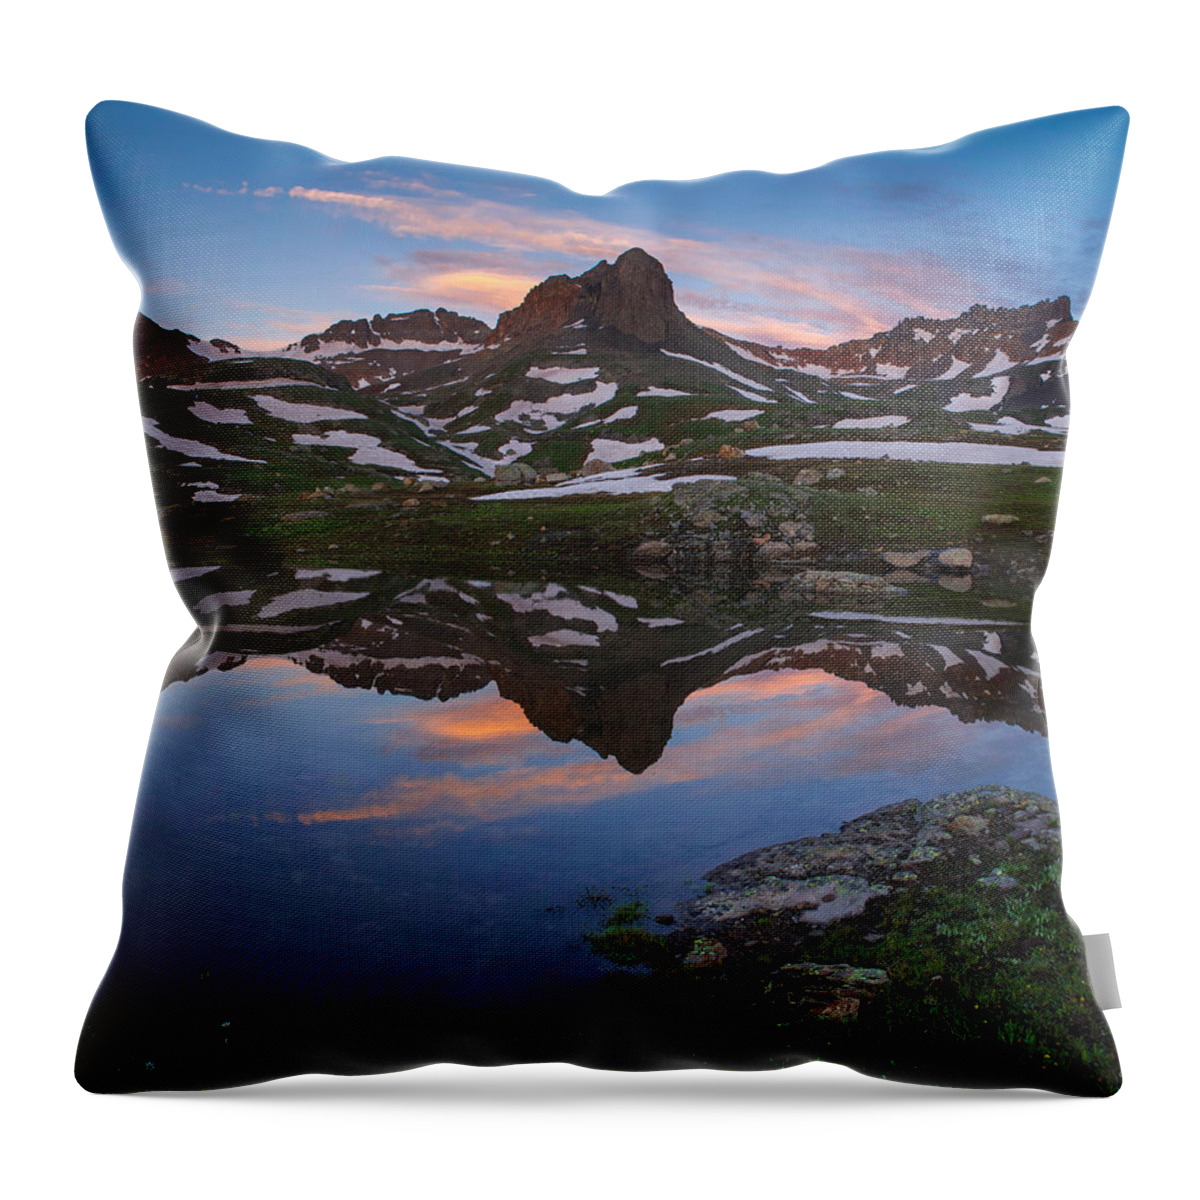 Reflection Throw Pillow featuring the photograph Ice Lakes Basin Sunrise by Aaron Spong